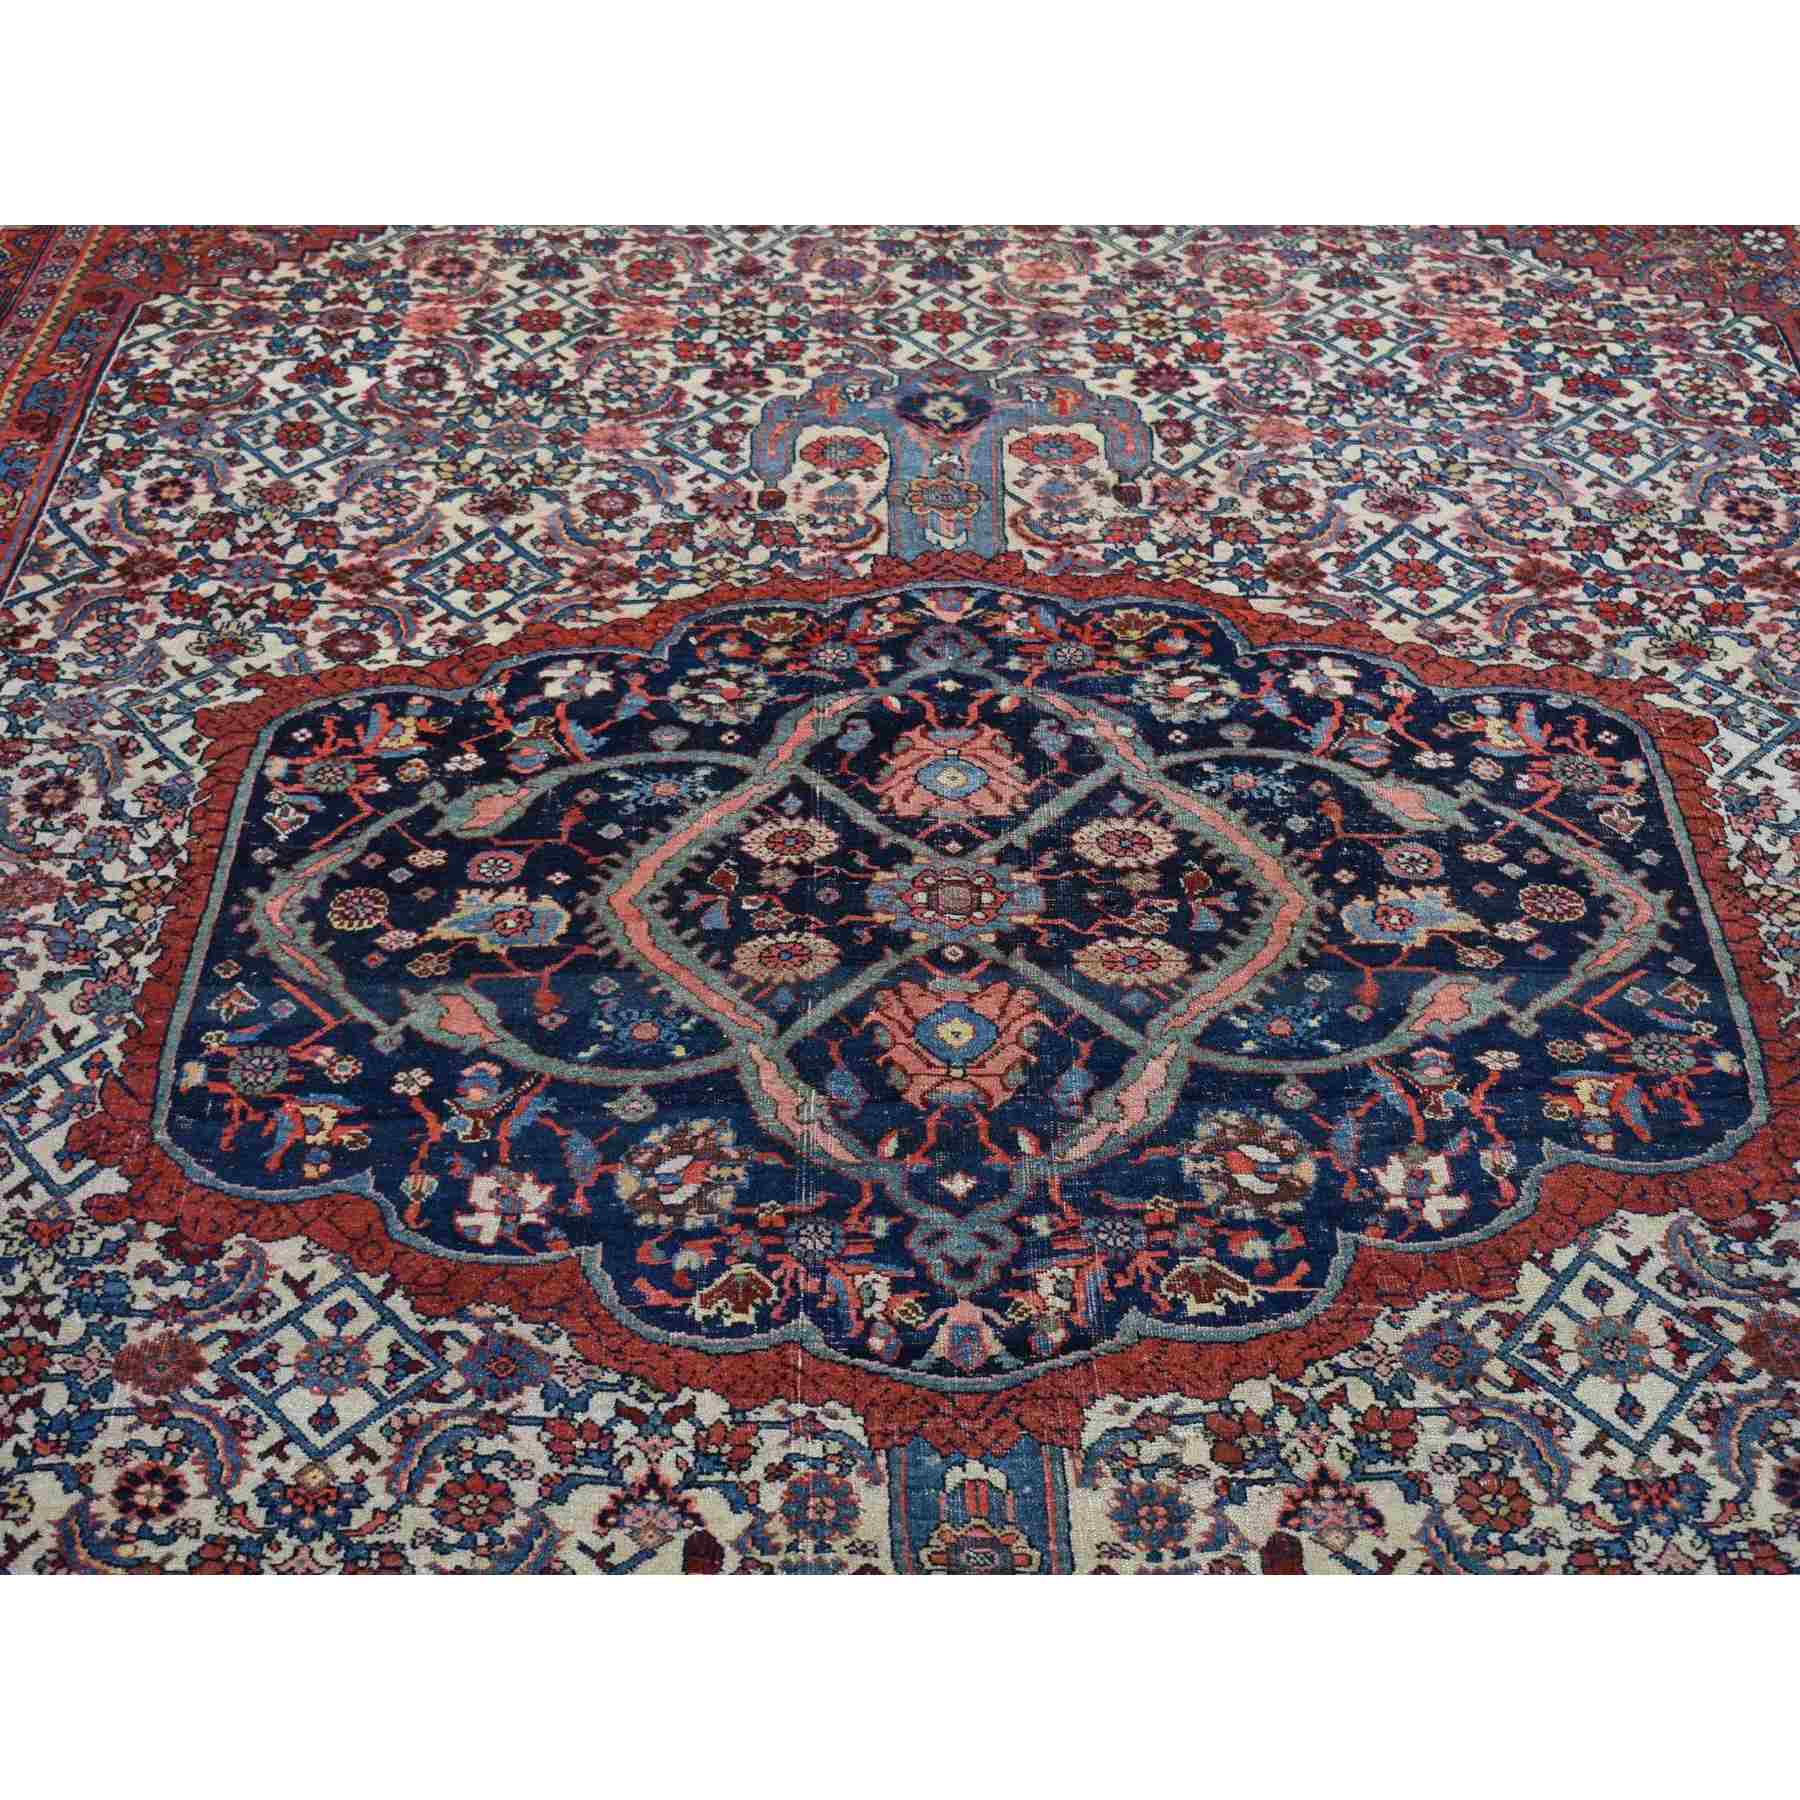 Antique-Hand-Knotted-Rug-400650